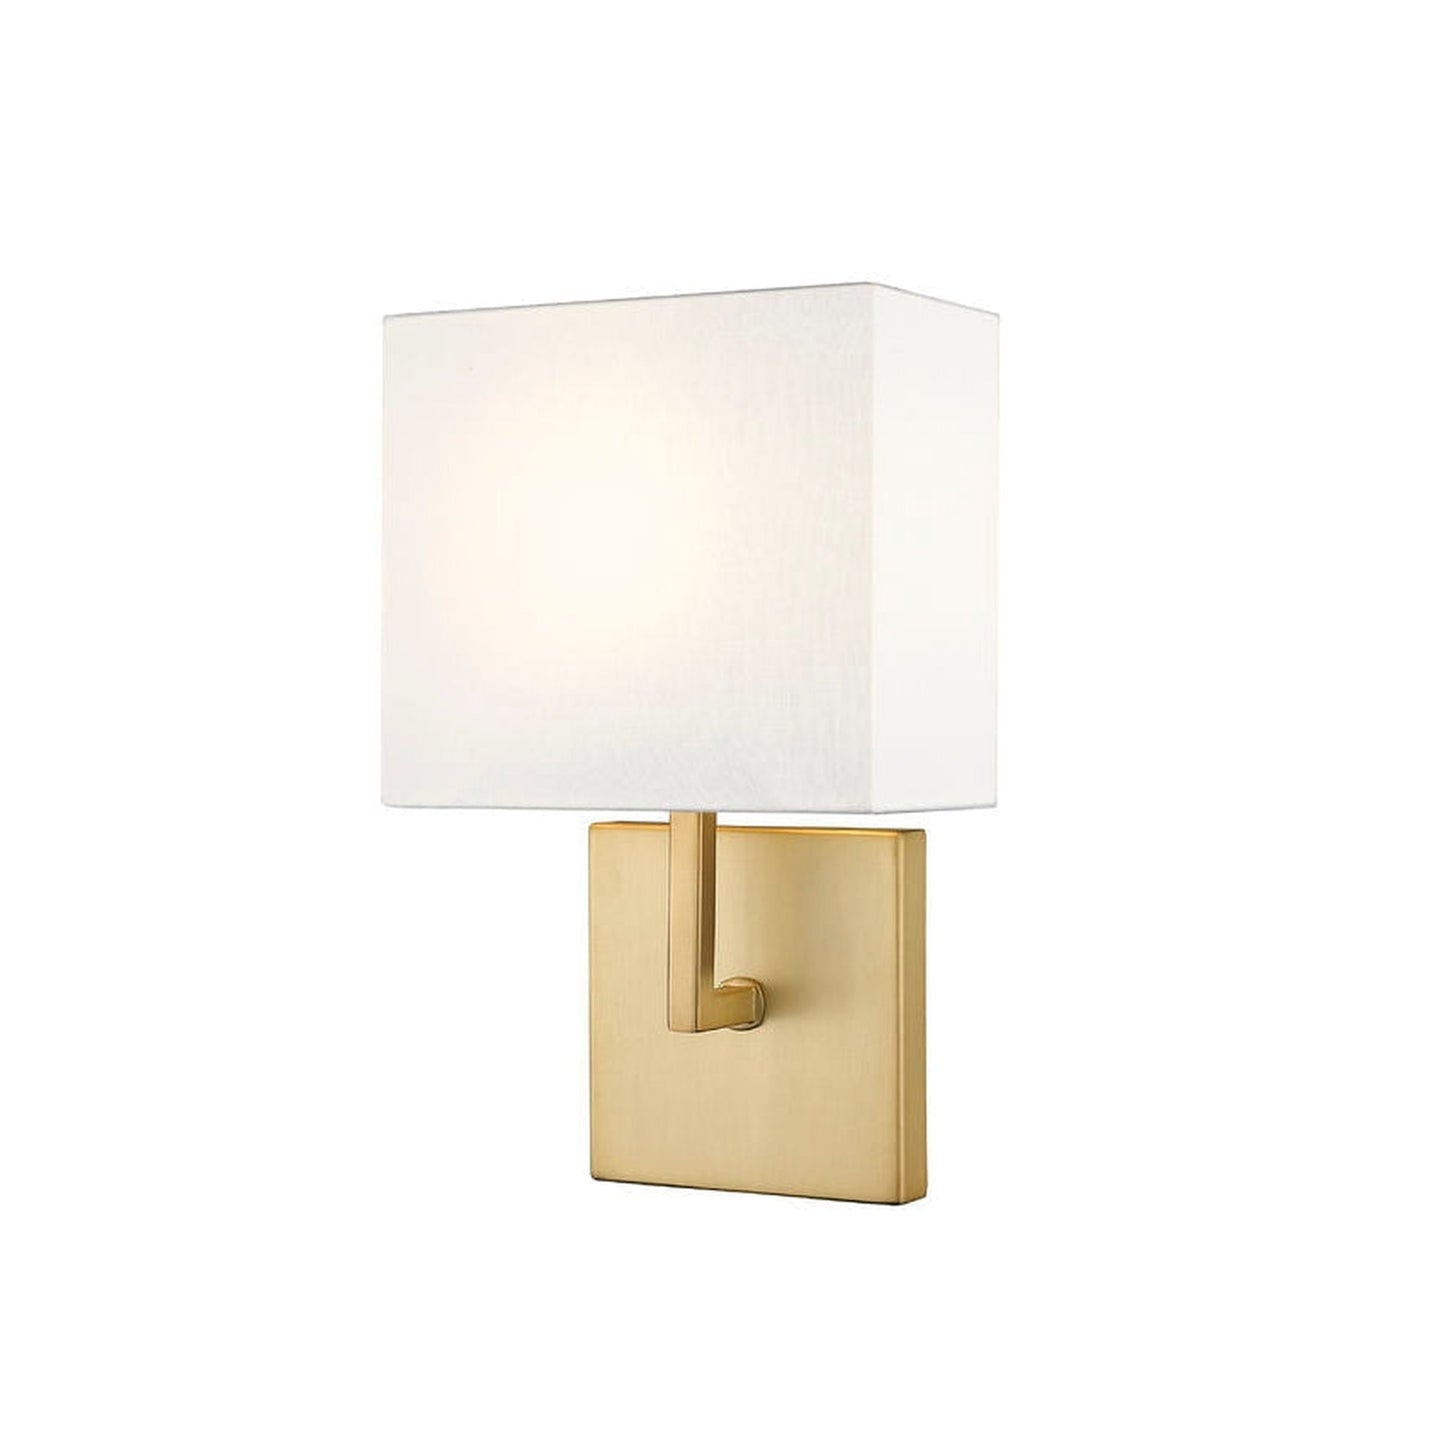 Z-Lite Saxon 7" 1-Light Olde Brass Wall Sconce With White Fabric Shade